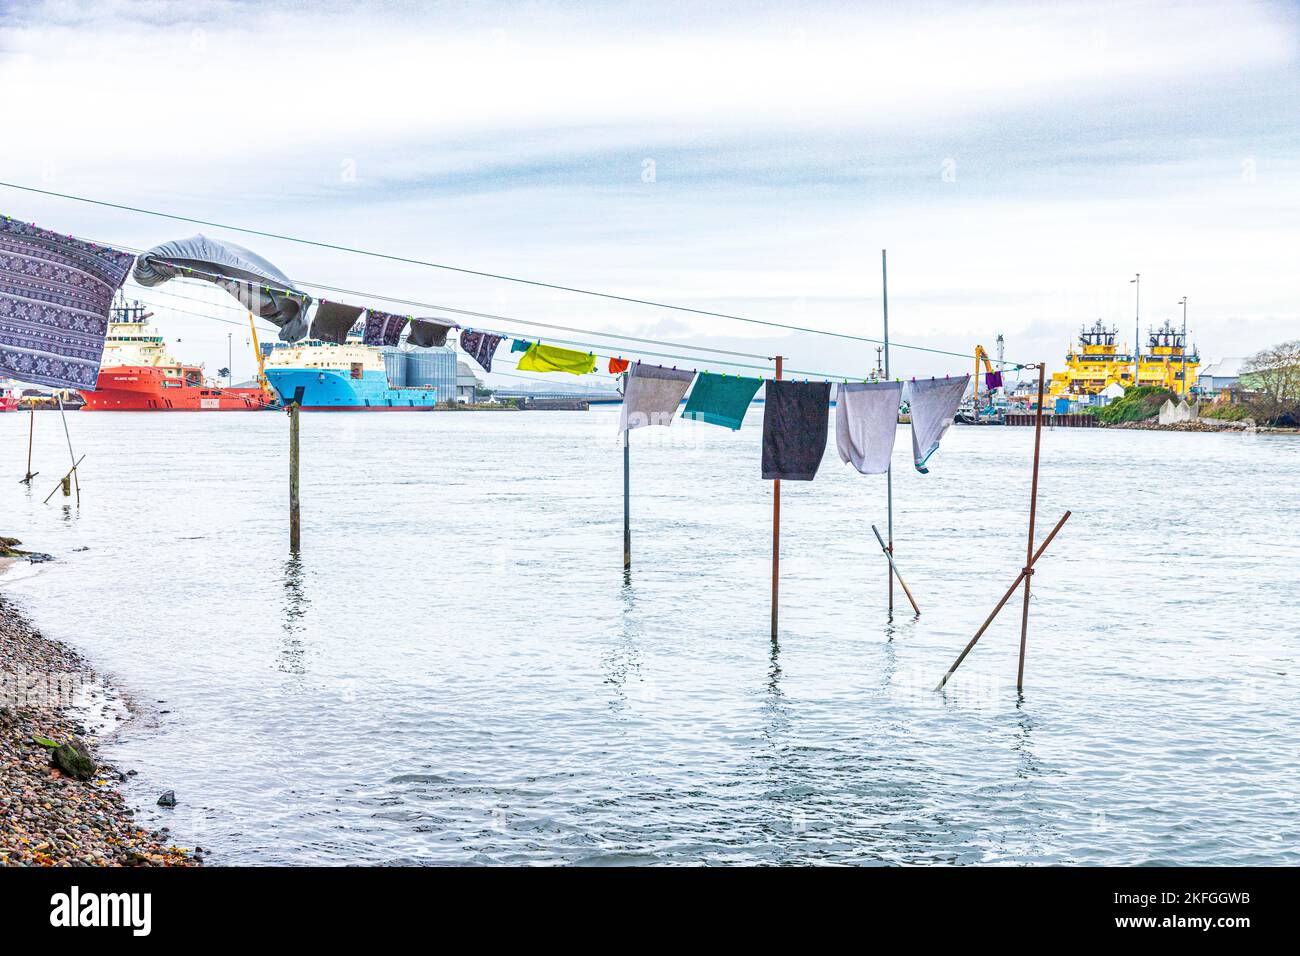 Washing hung out to dry on a line on a pulley system over the River South Esk at Ferryden, Montrose, Angus, Scotland UK Stock Photo